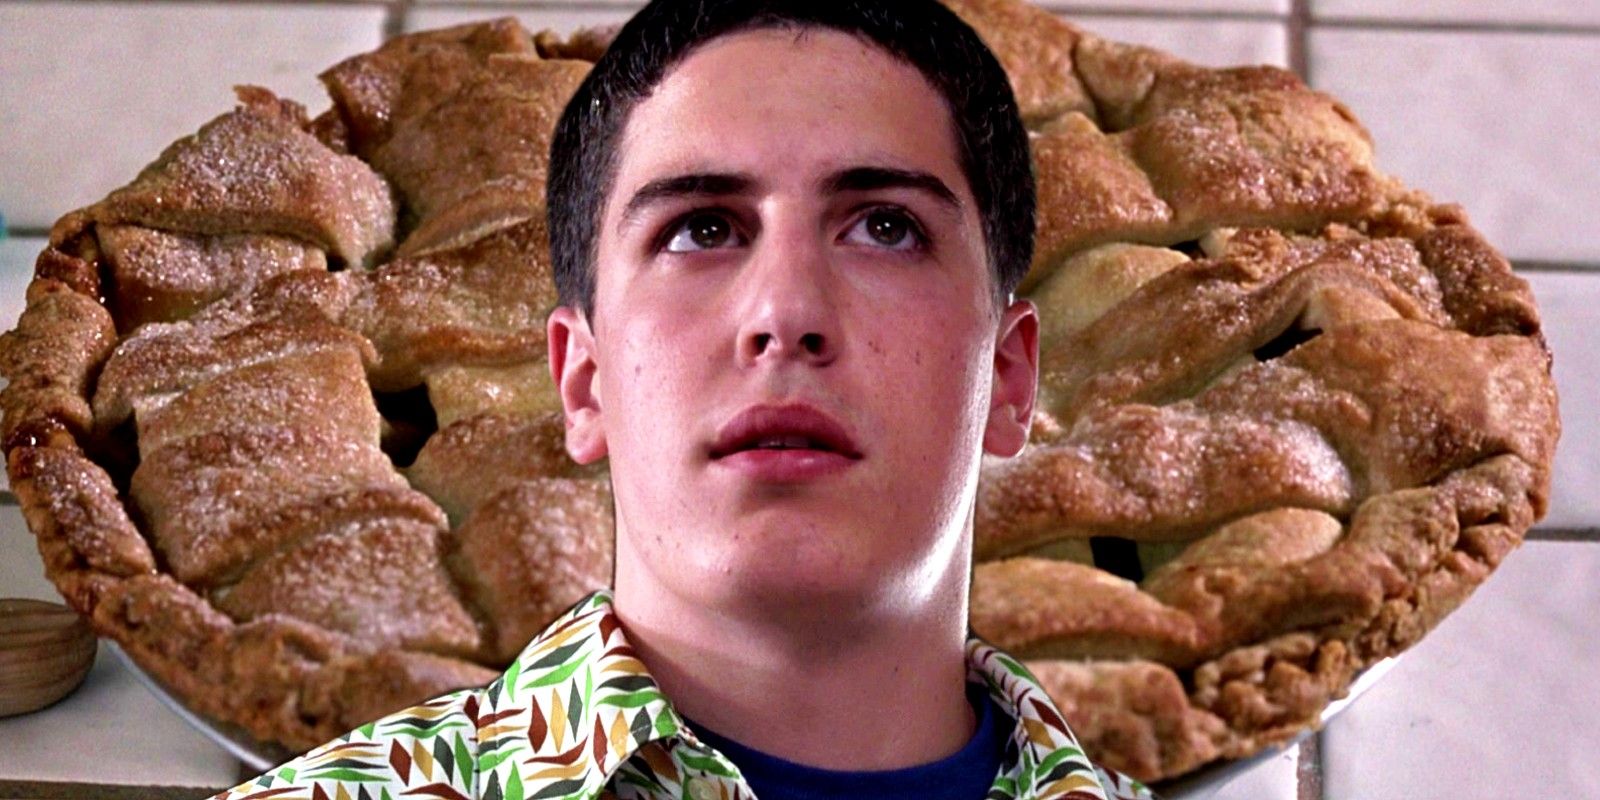 jason-biggs-in-the-movie-american-pie-with-the-infamous-apple-pie-behind-him.jpg